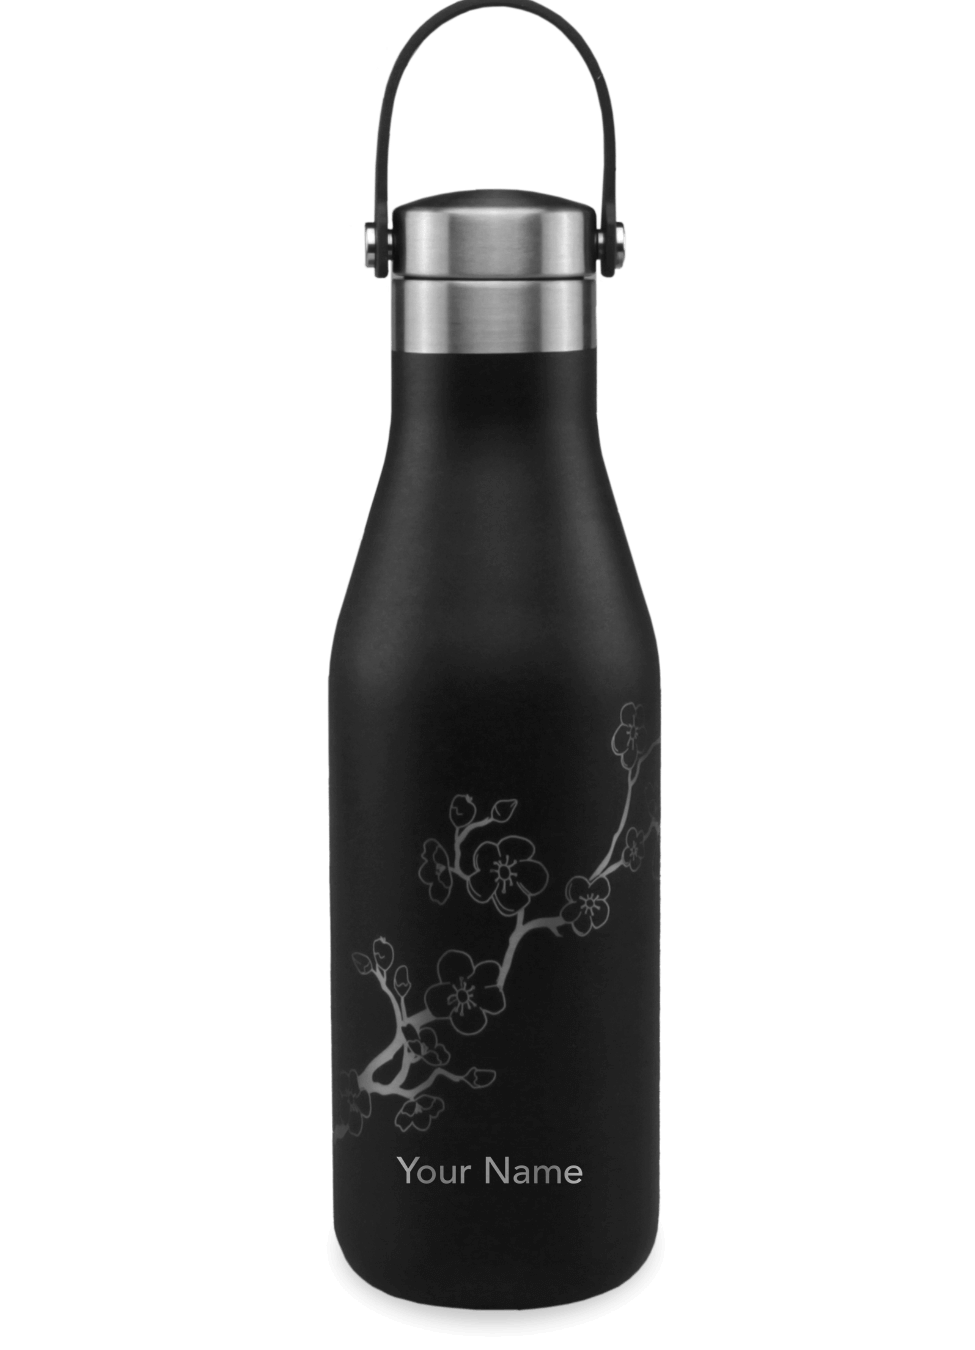 Ohelo Personalised Ohelo Personalised Water Bottle in Black with Blossom Water Bottle with BlackBlo Pattern